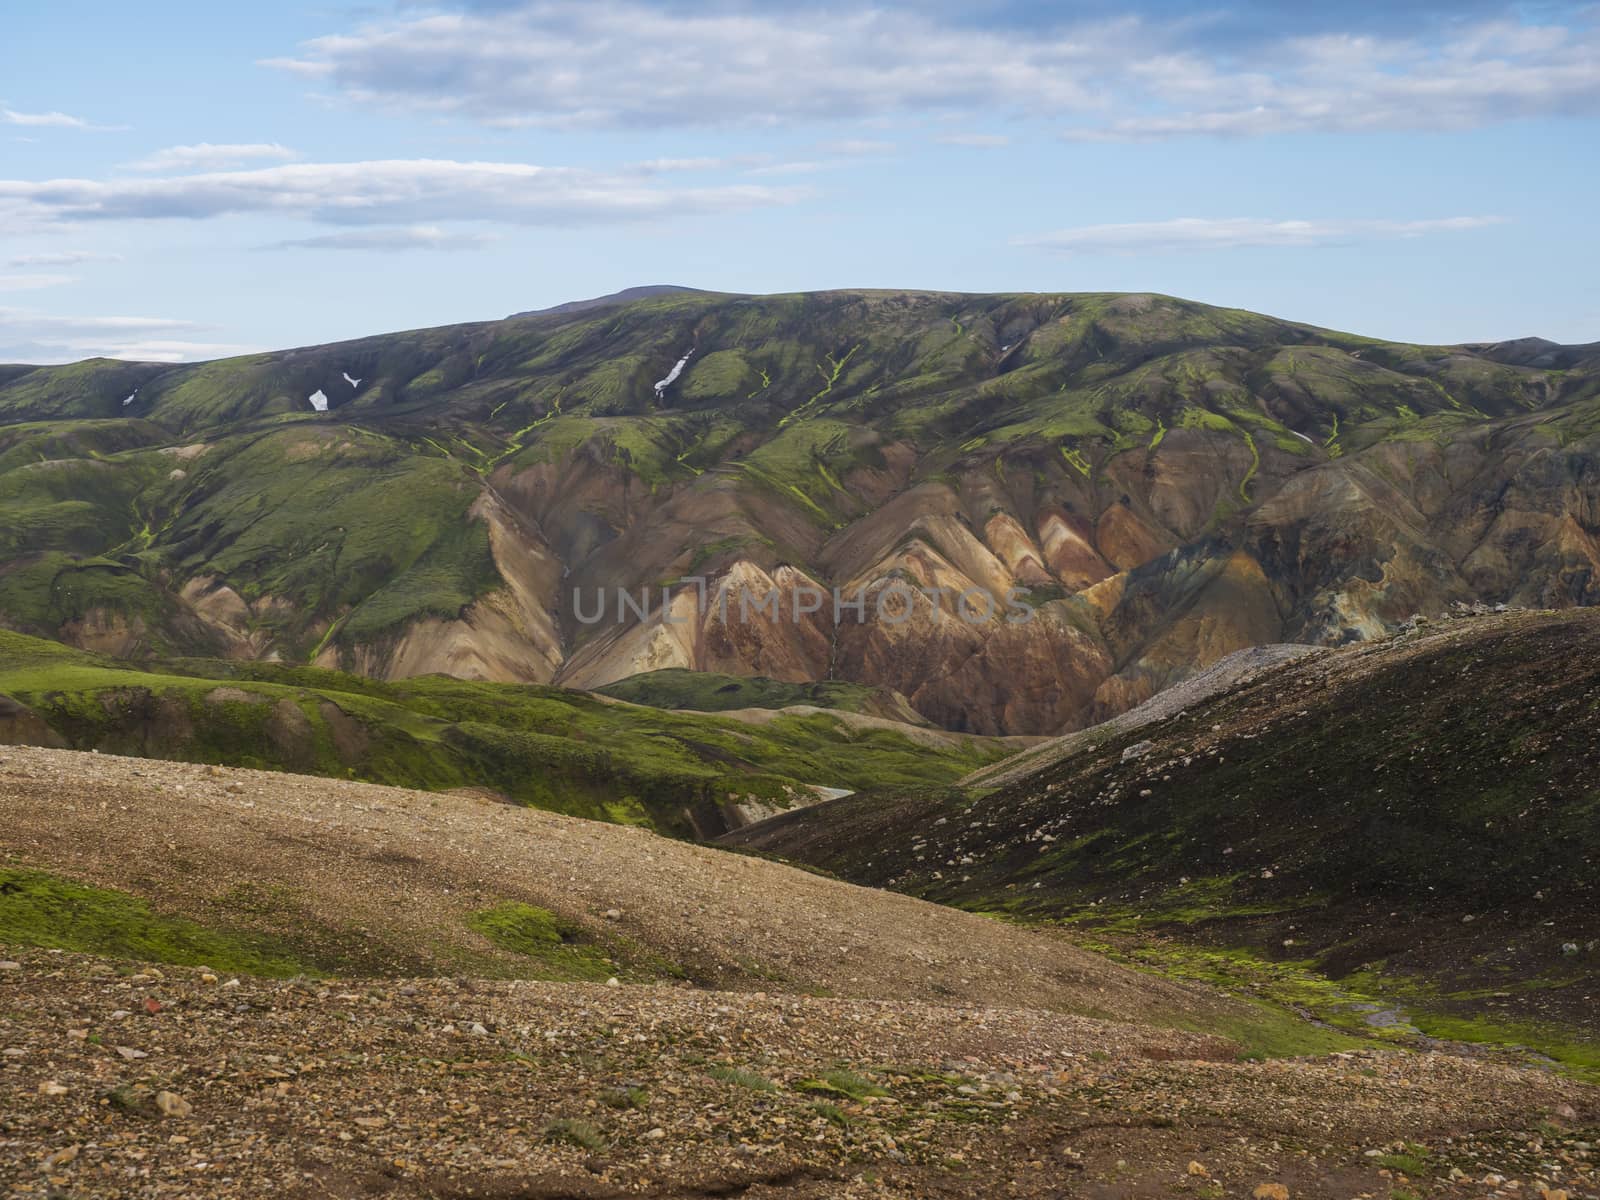 Colorful Rhyolit mountain panorma with multicolored volcanos in Landmannalaugar area of Fjallabak Nature Reserve in Highlands region of Iceland.